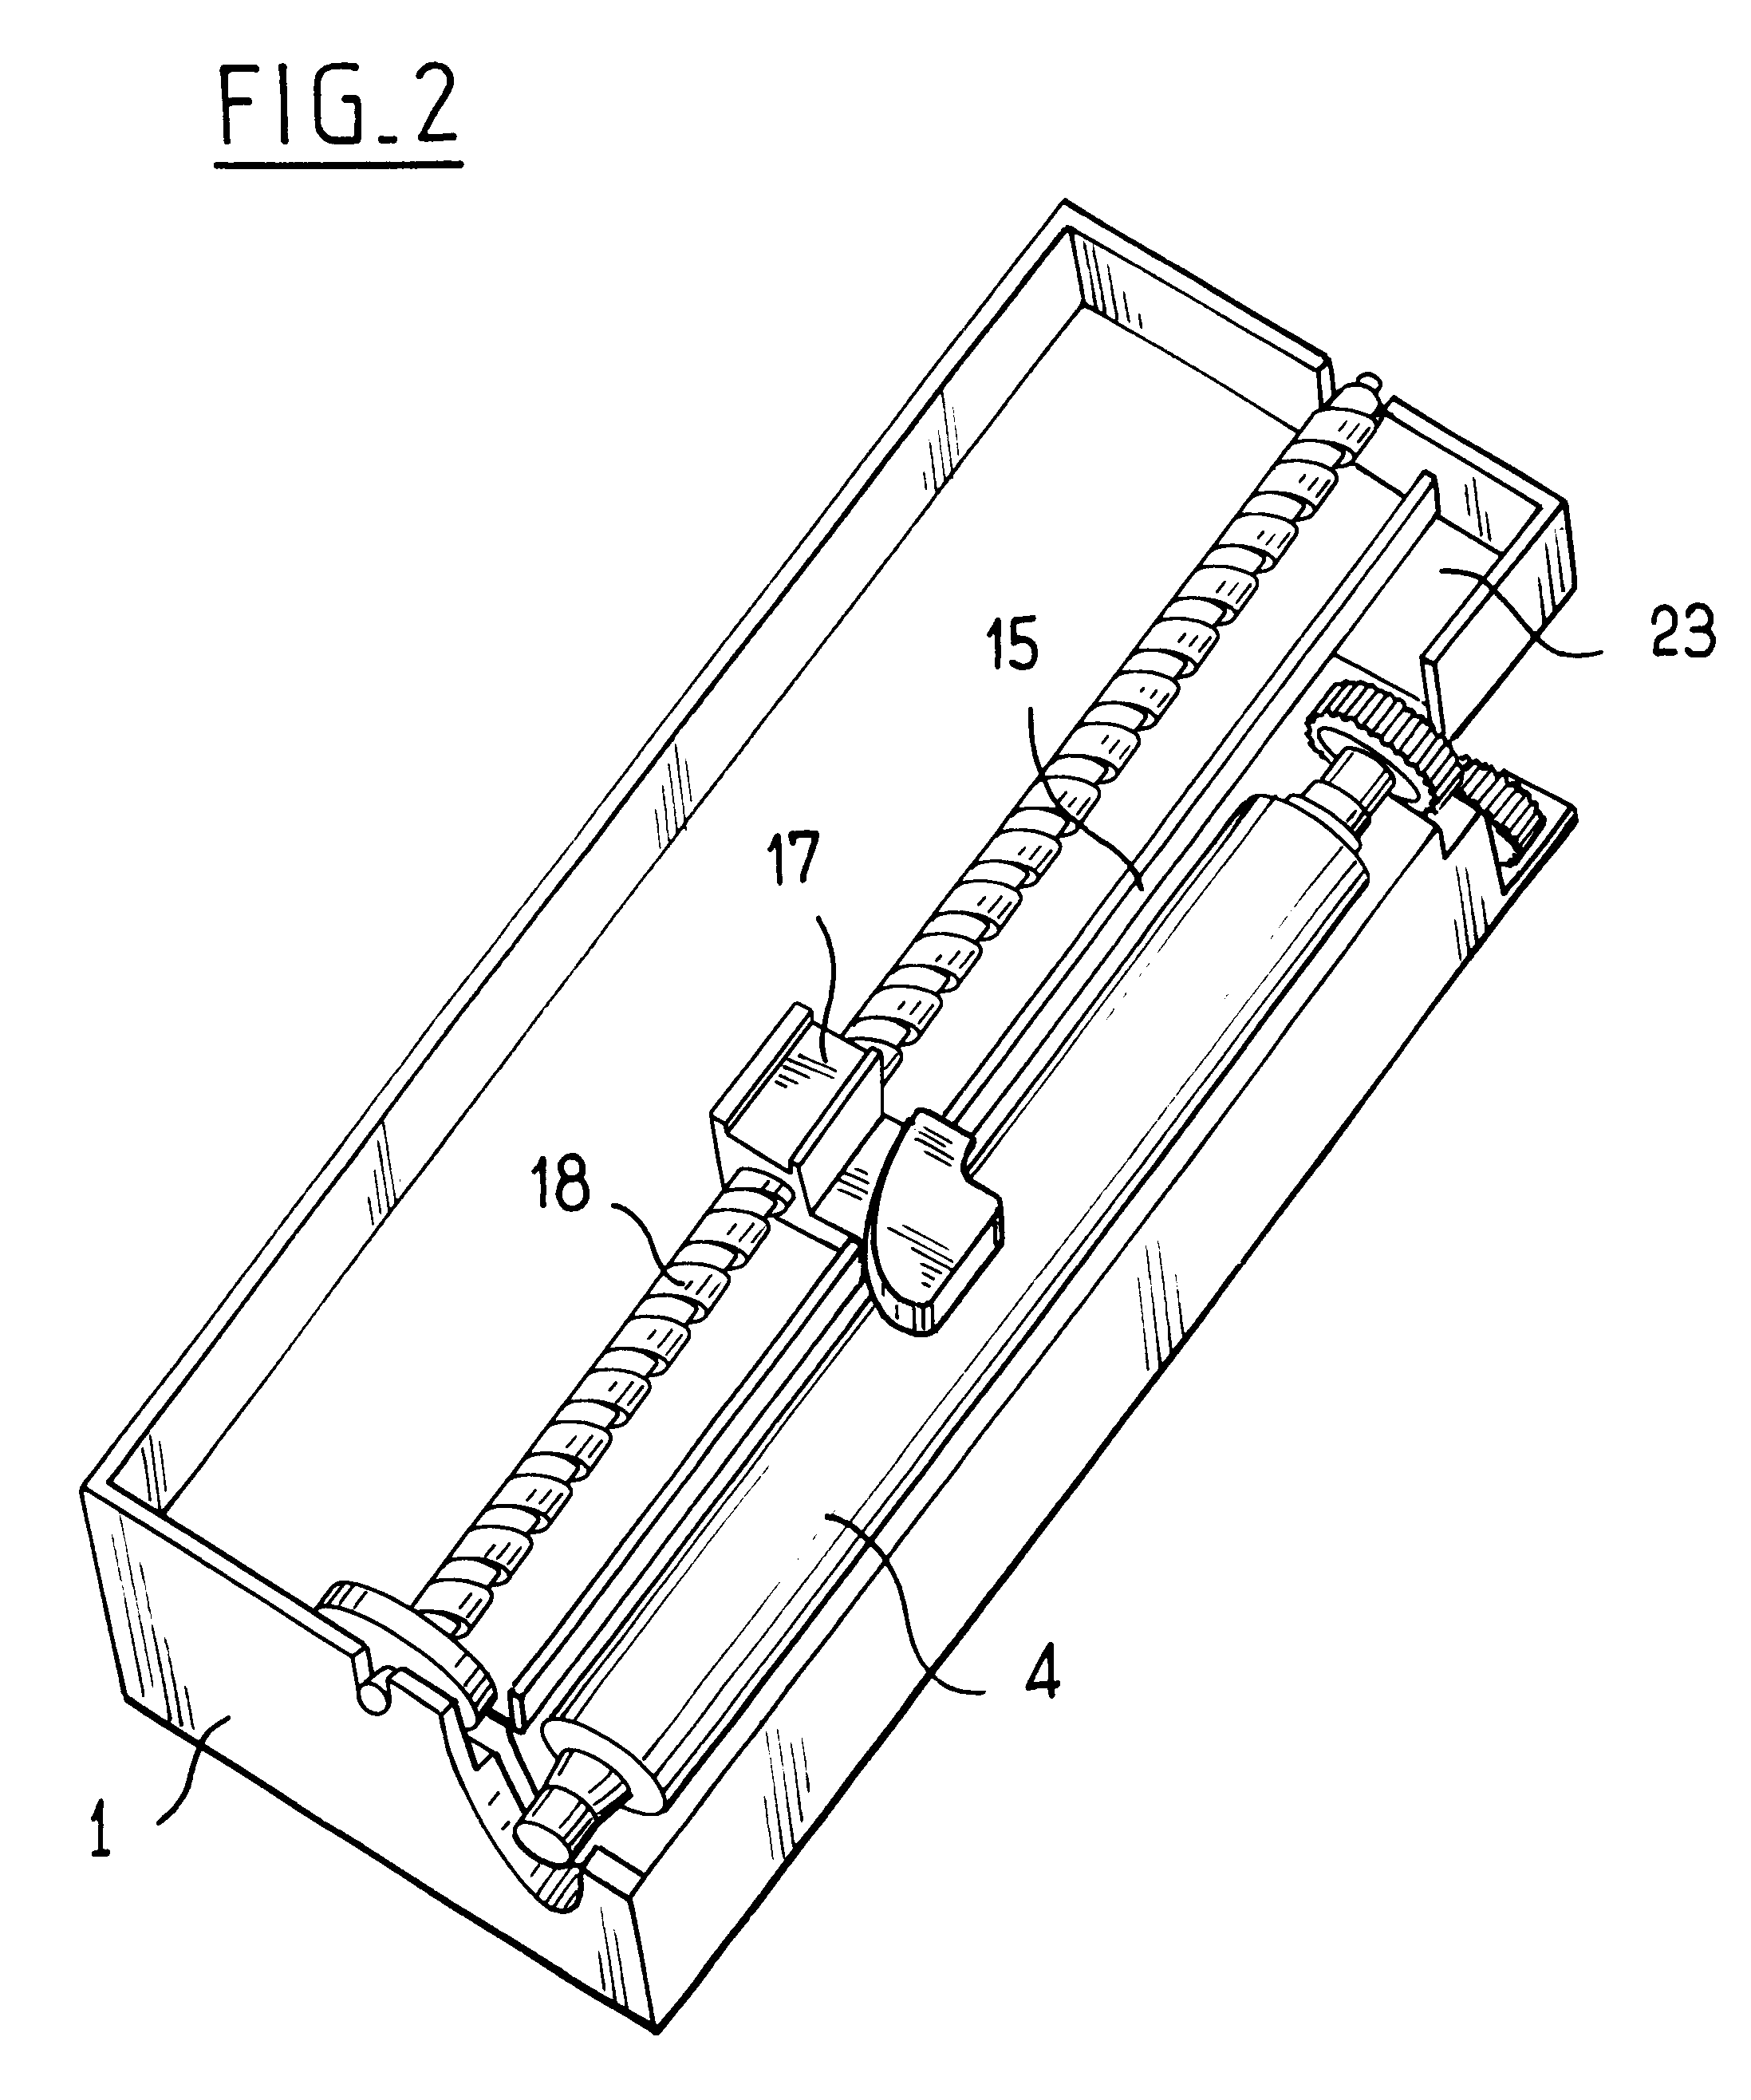 Device for printing on paper tape and for cutting the tape into printed tickets